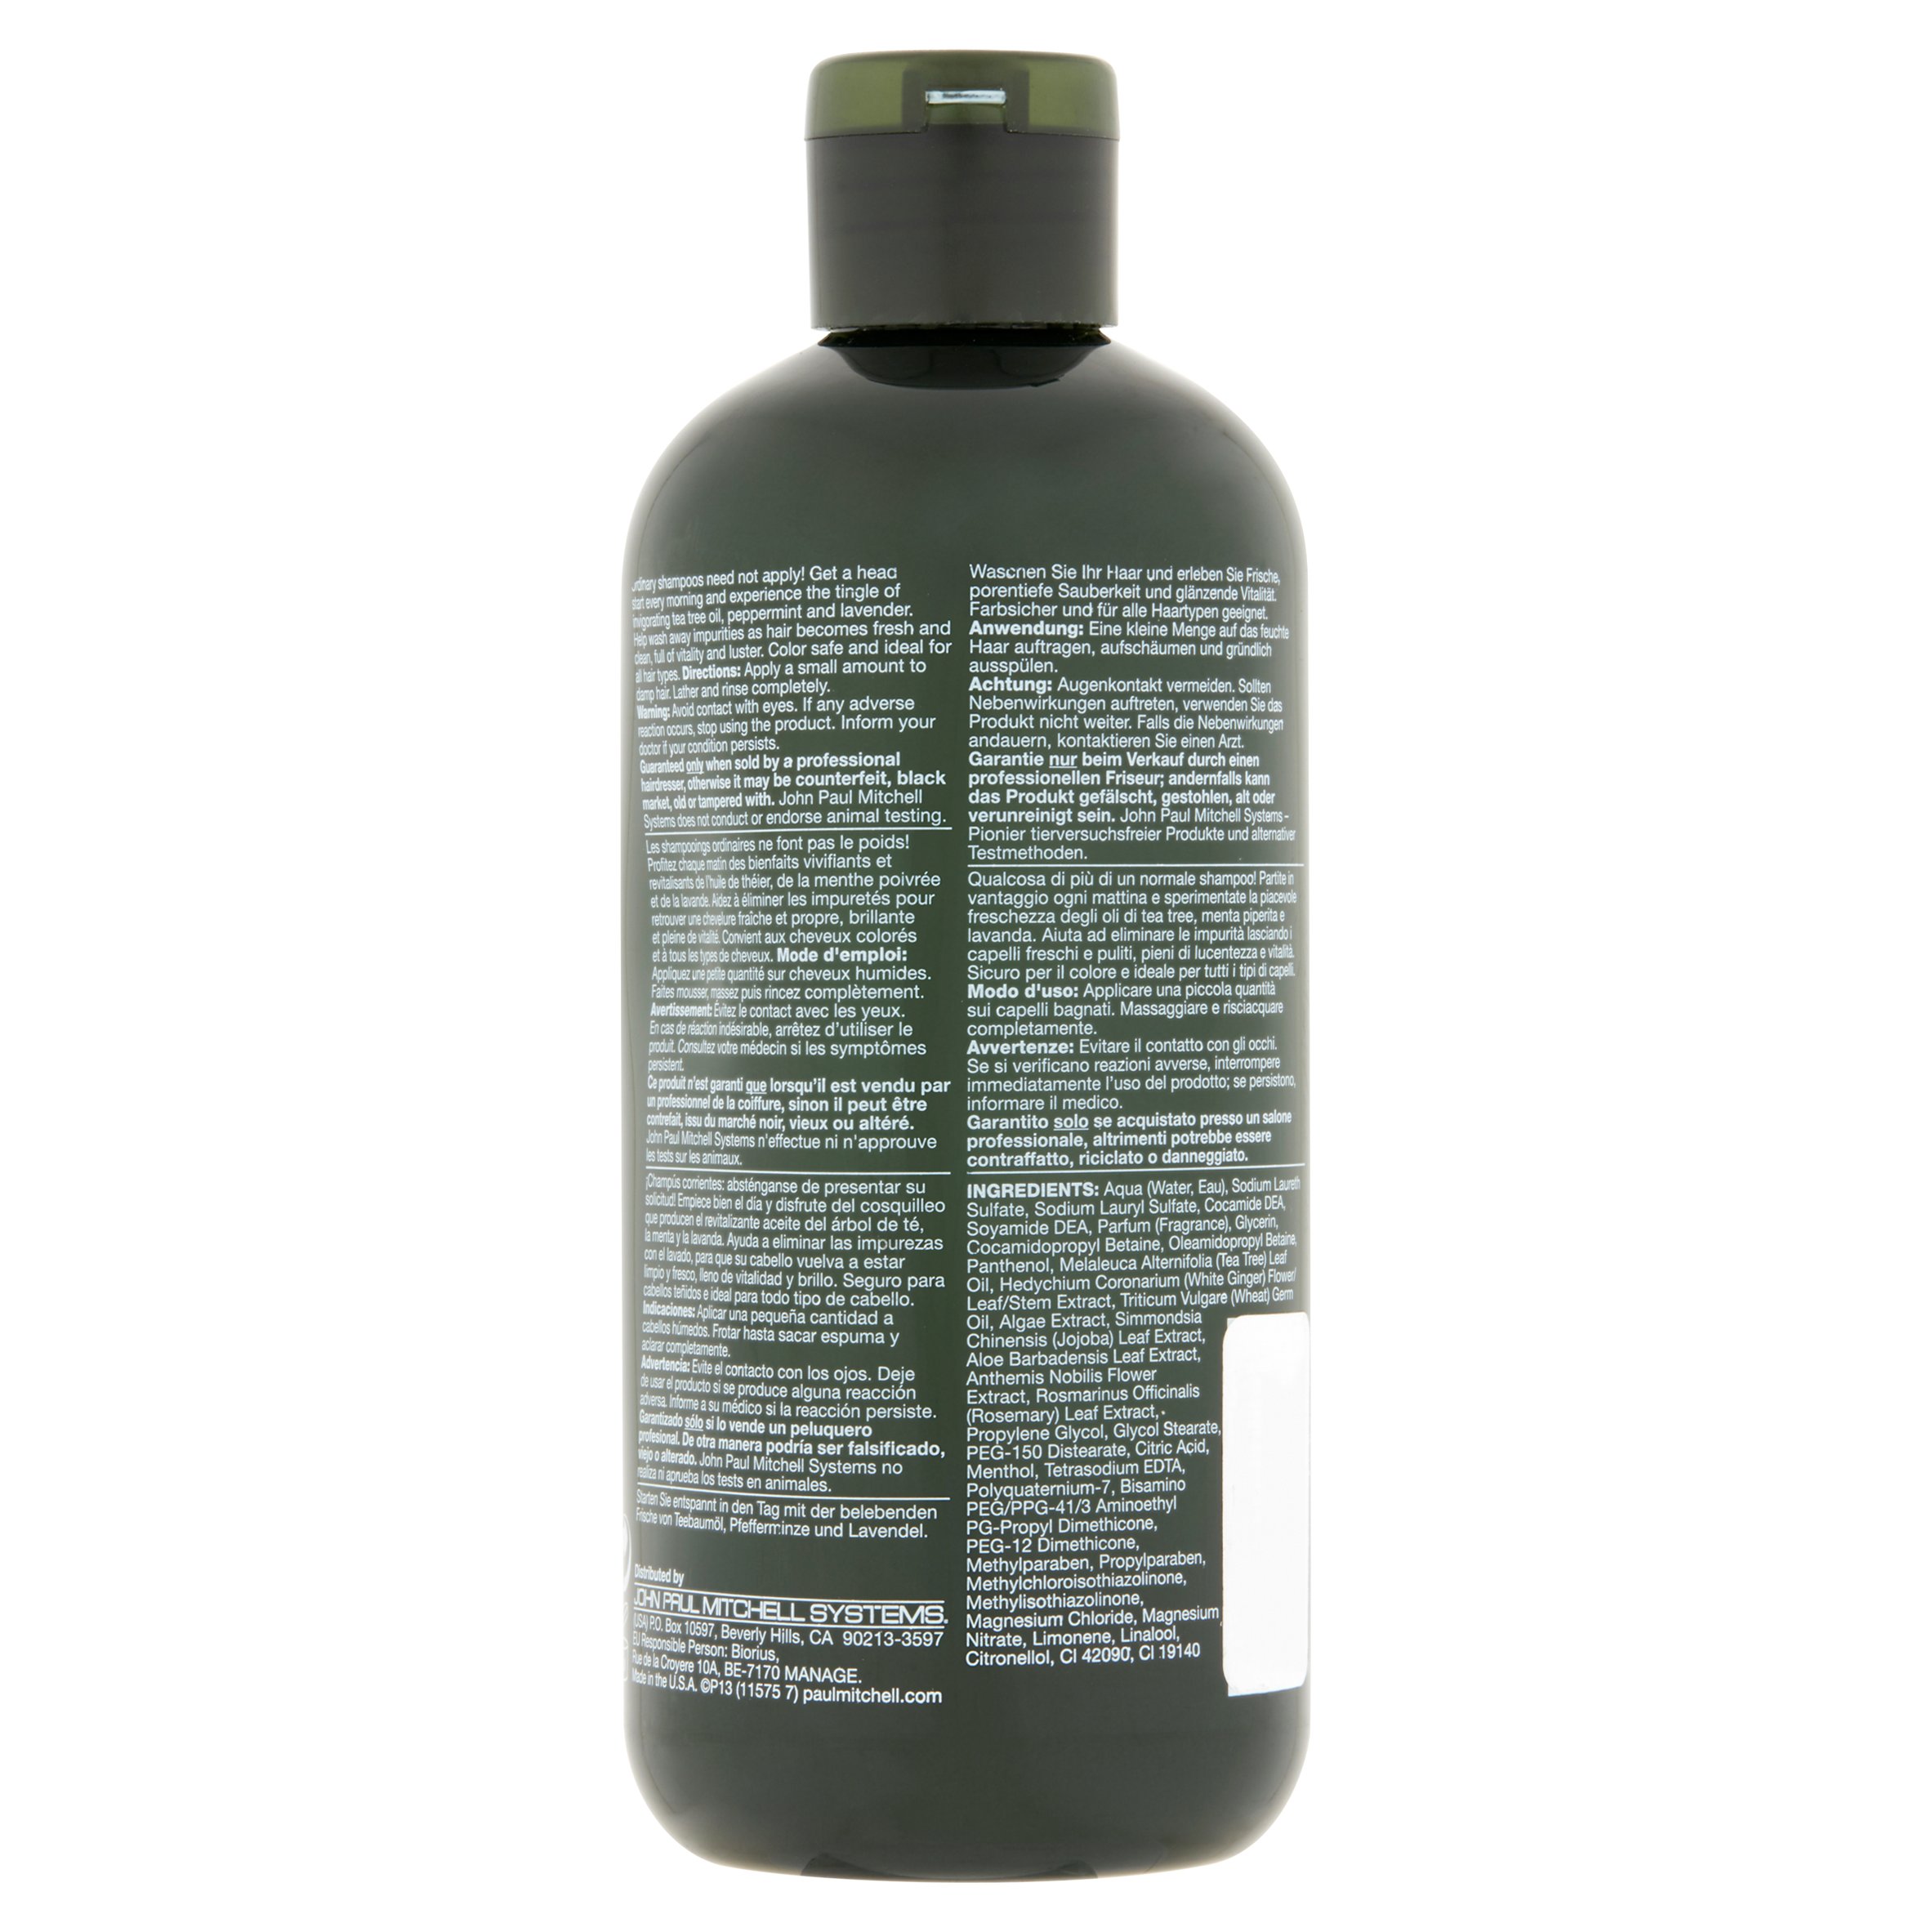 Paul Mitchell Tea Tree Special Clarifying Daily Shampoo with Peppermint & Lavender, 16.9 fl oz - image 3 of 4